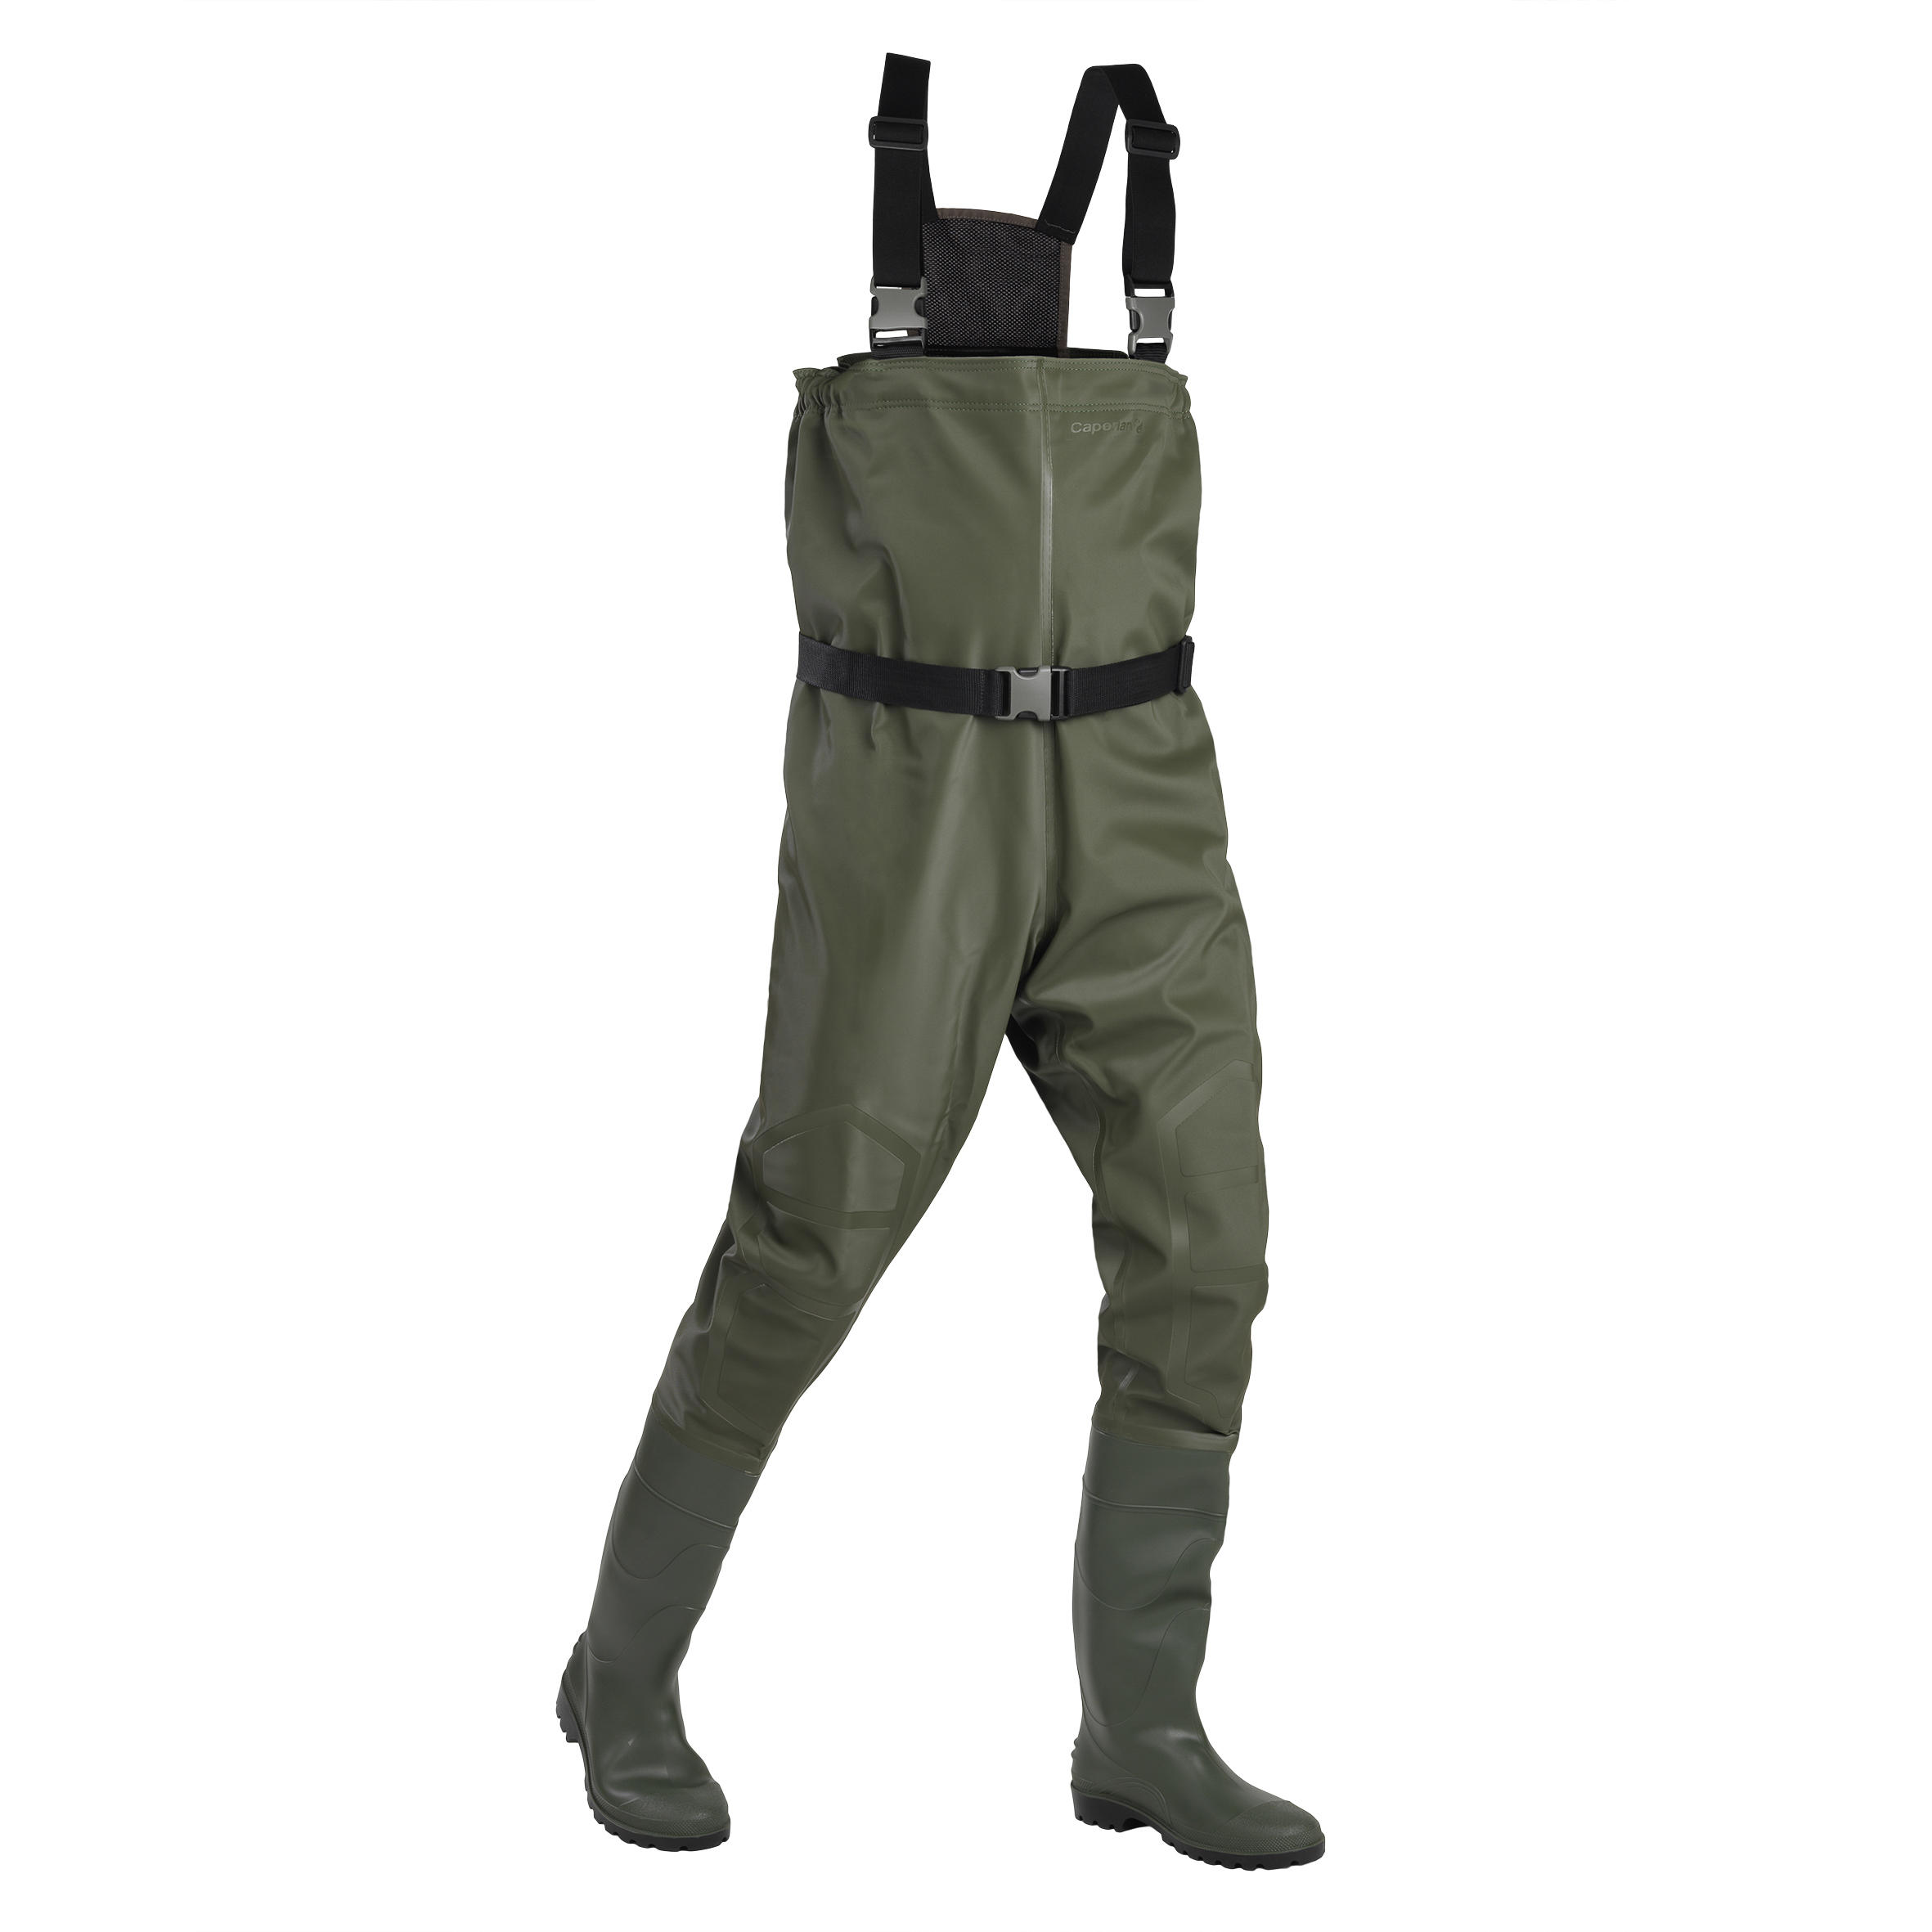 CS: Wader Care - How To Maintain Your Fishing Waders